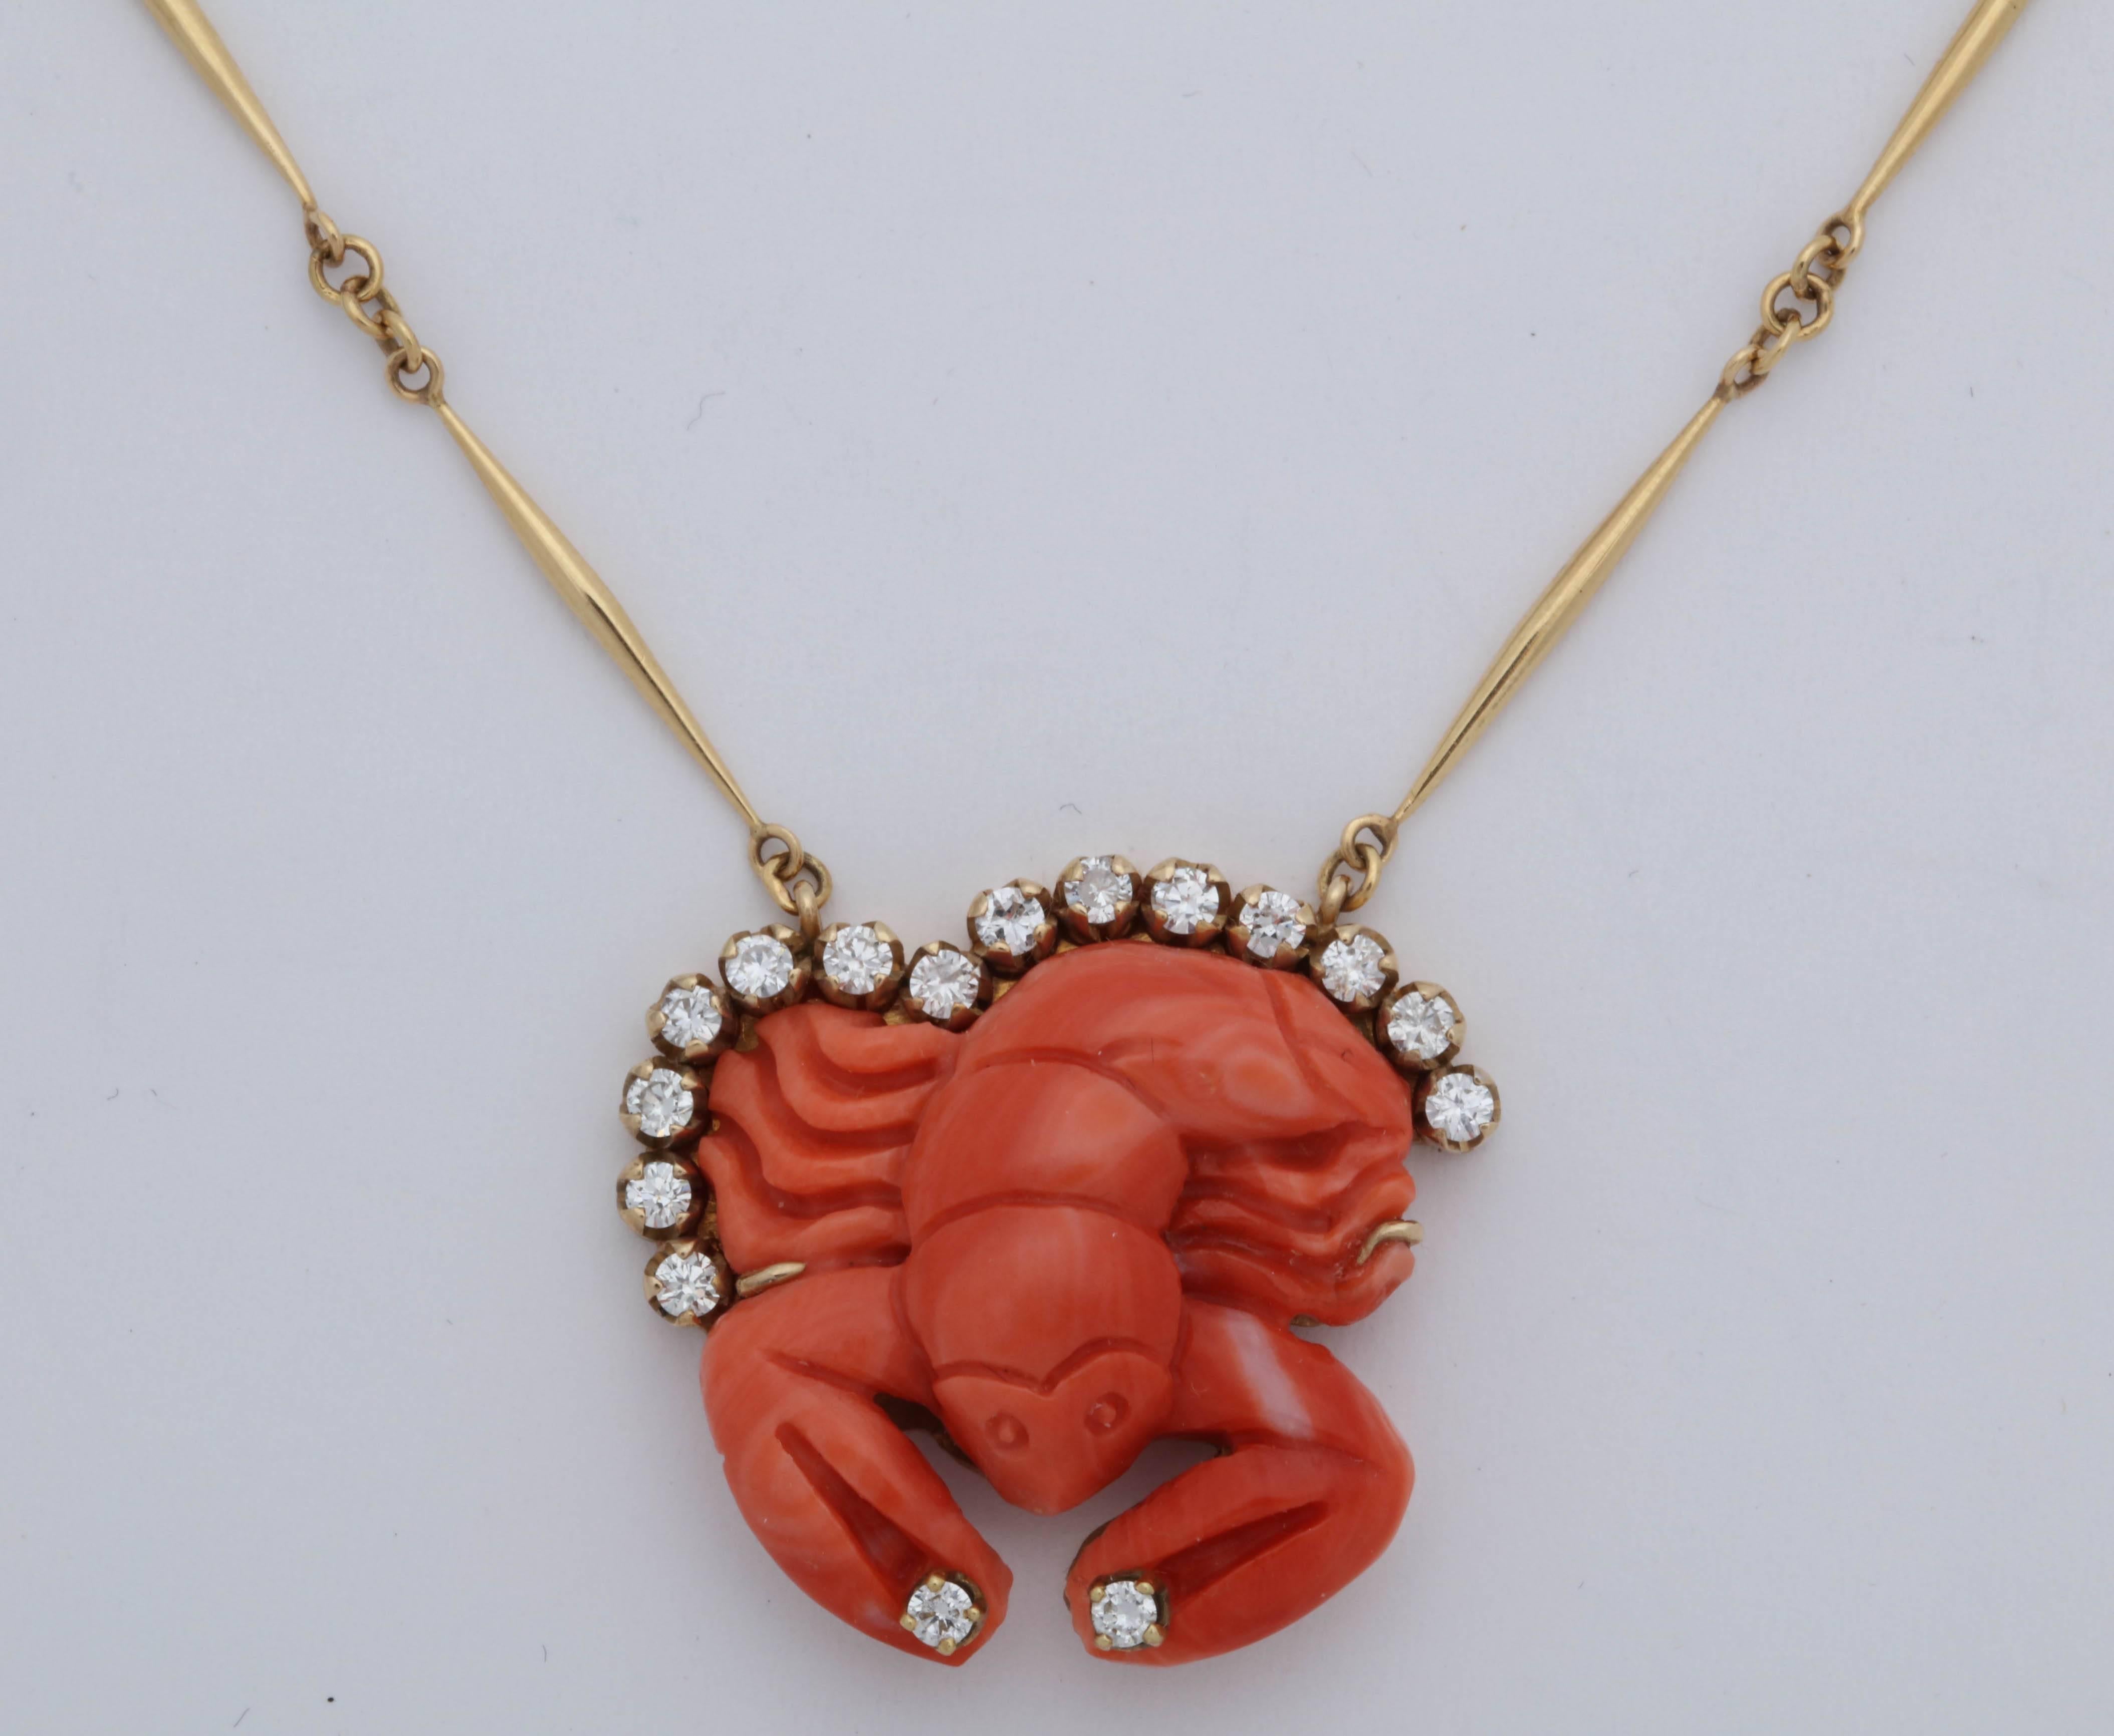 One Ladies 18kt Yellow Gold Link Necklace Designed With A Whimsical Carved Coral Figural Lobster. Color Of Coral resembles A True Lobster Color Pendant _ Necklace is Beautifully Designed With Sixteen Full cut Diamonds Weighing Approximately 1.00